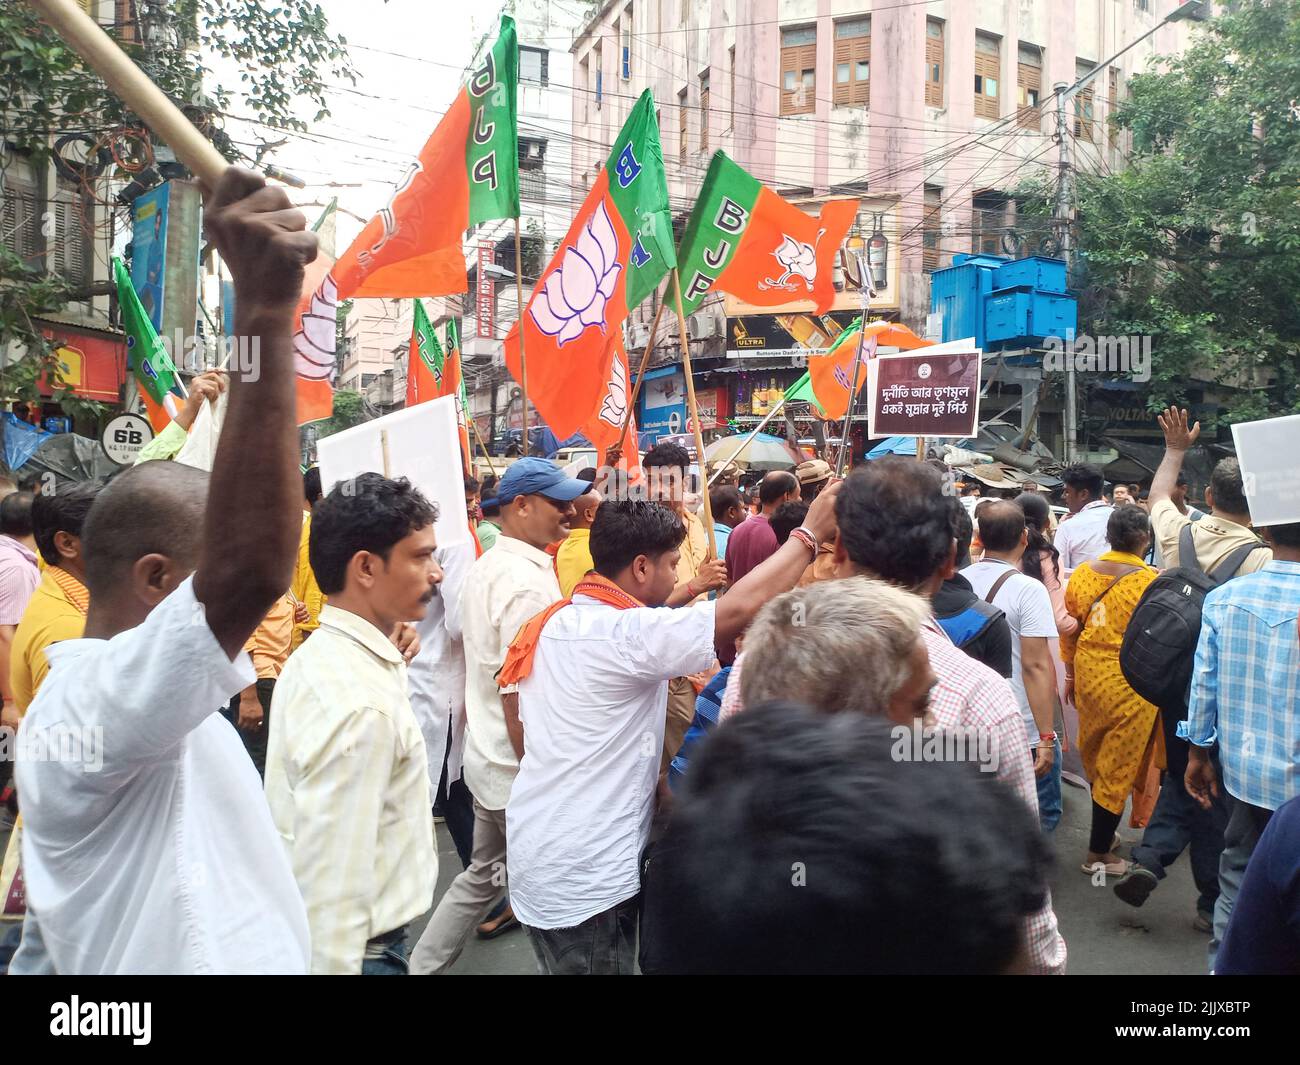 KOLKATA, WEST BENGAL, INDIA - 28 July 2022: Bengal BJP addressed a rally on tuesday in kolkata for money scam by industry minister Partha Chatterjee. Stock Photo